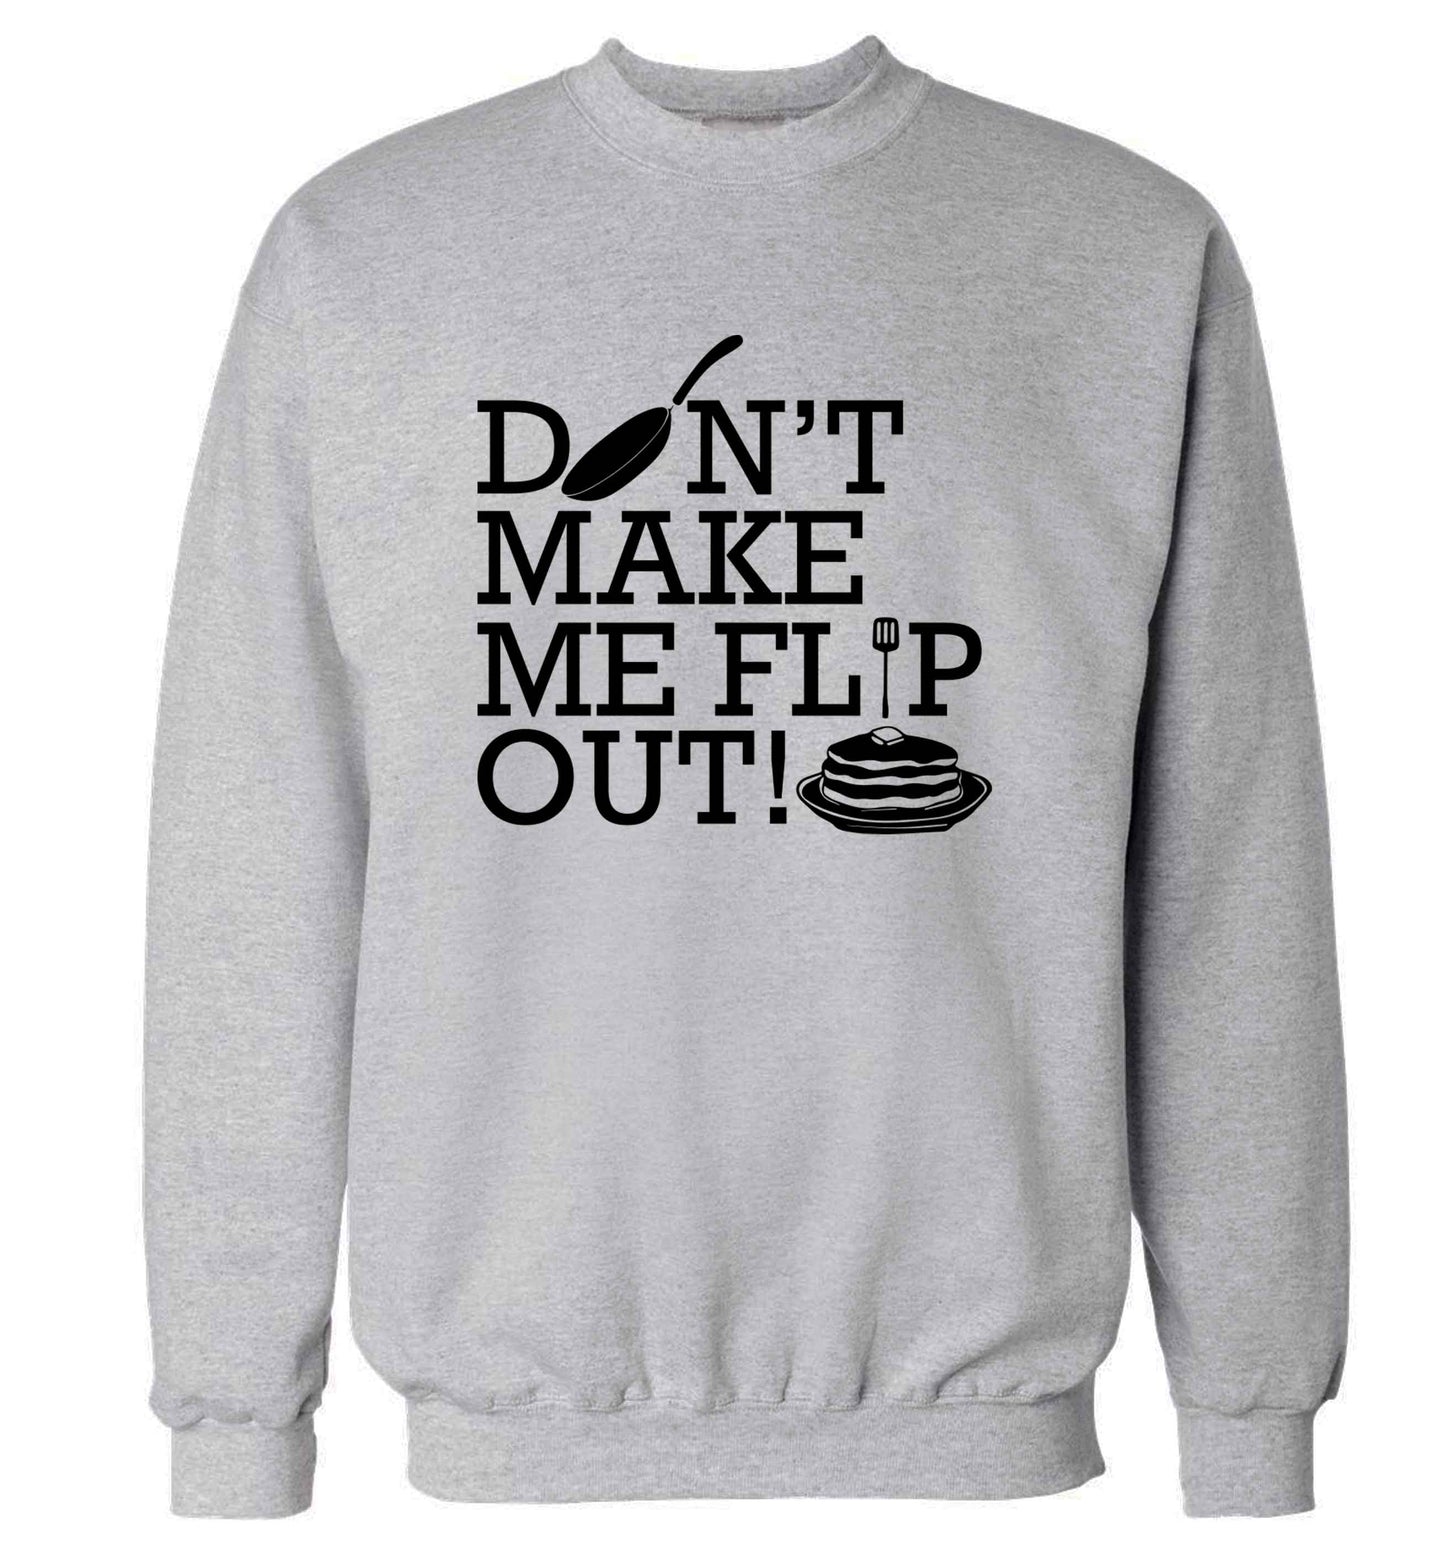 Don't make me flip out adult's unisex grey sweater 2XL